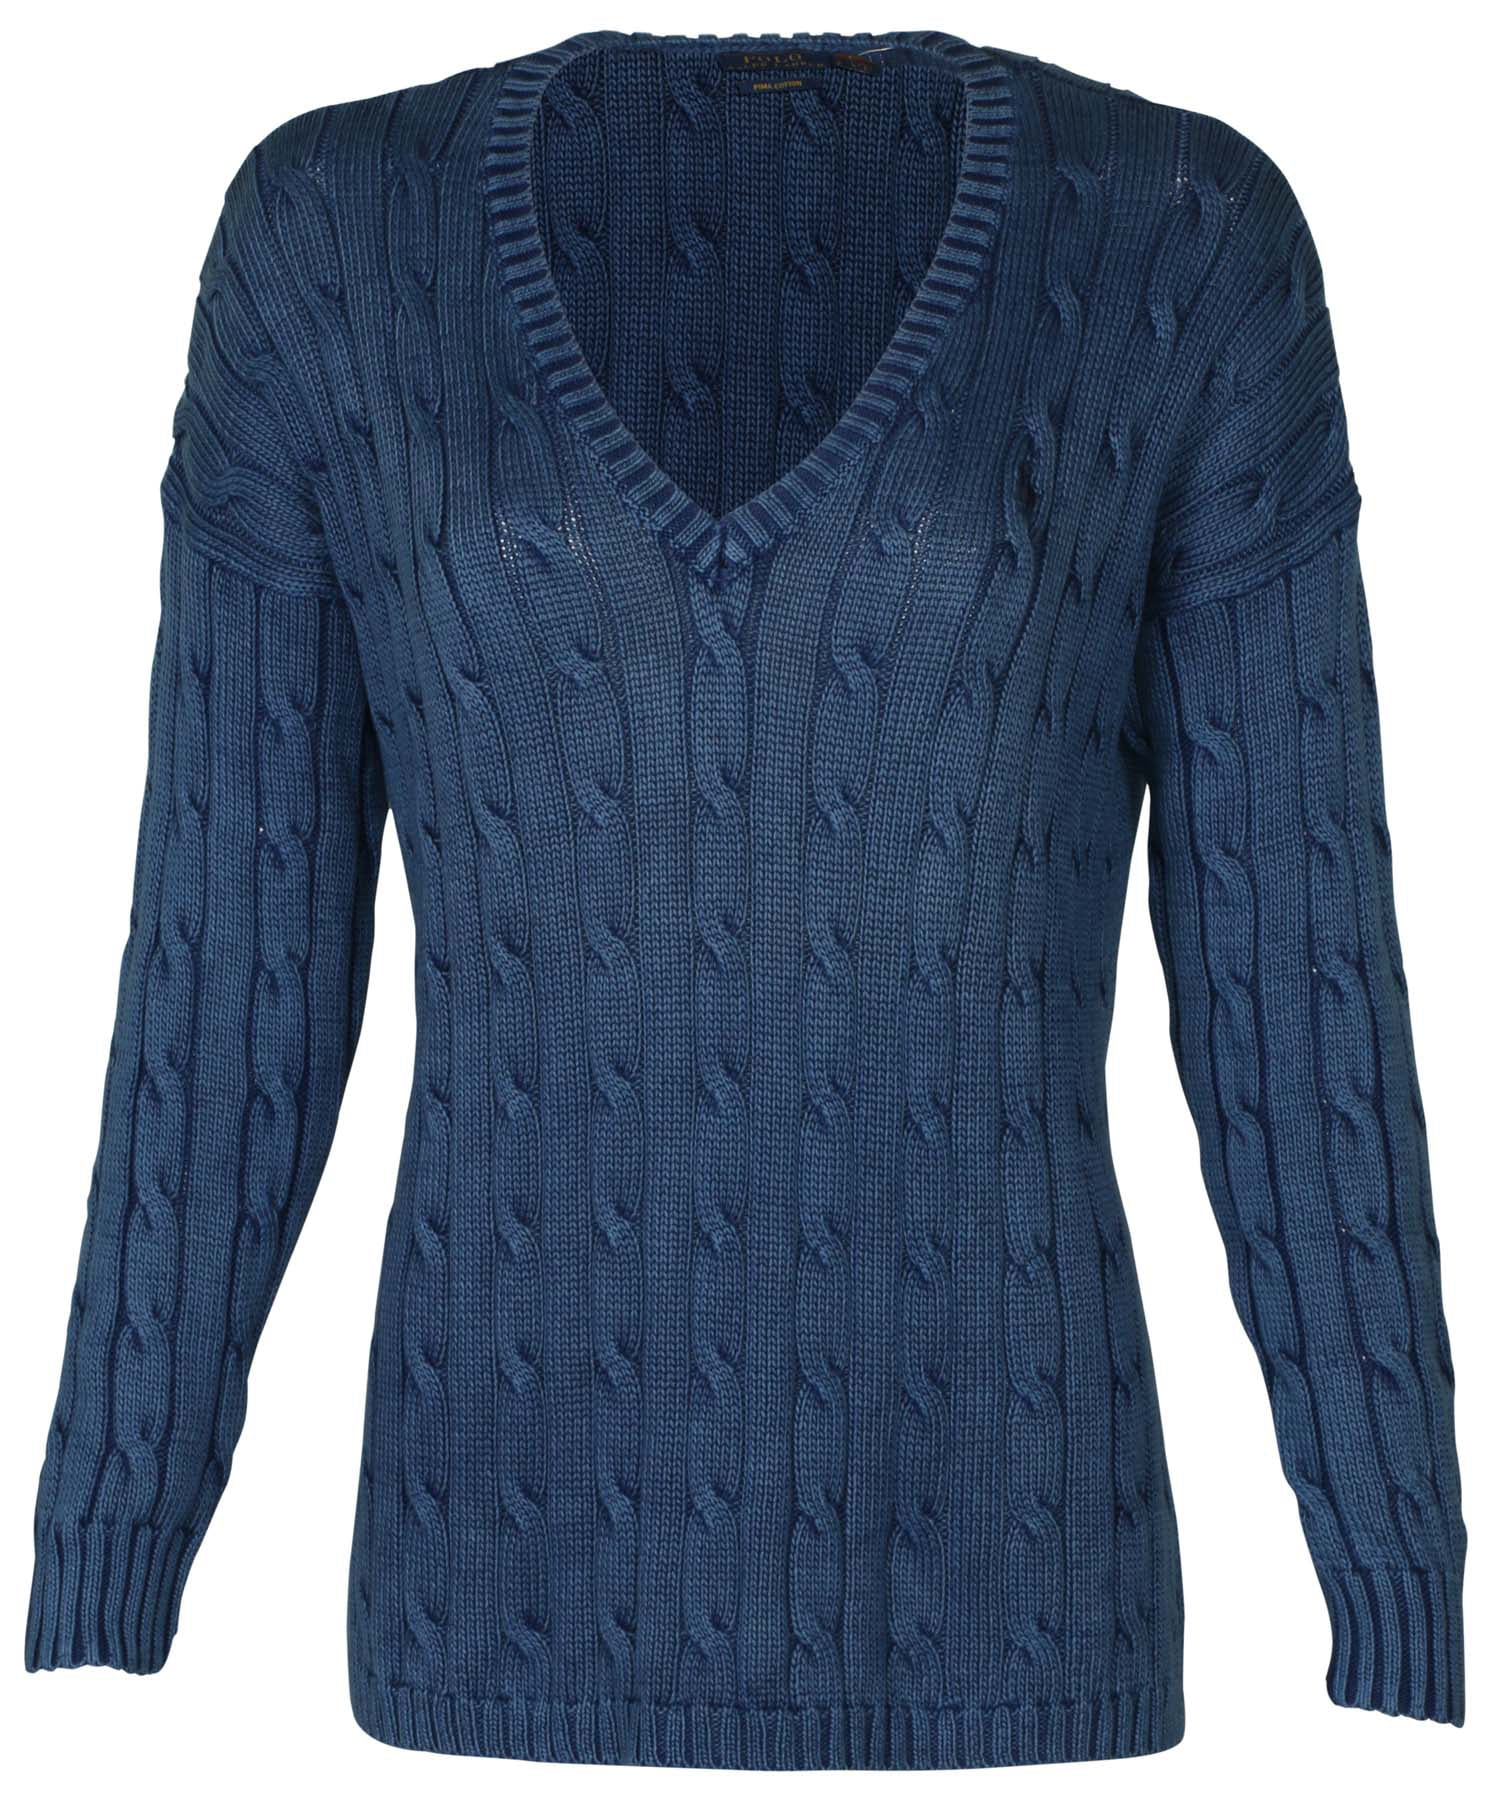 Polo Ralph Lauren Women's Cable Knit V-Neck Pony Sweater 